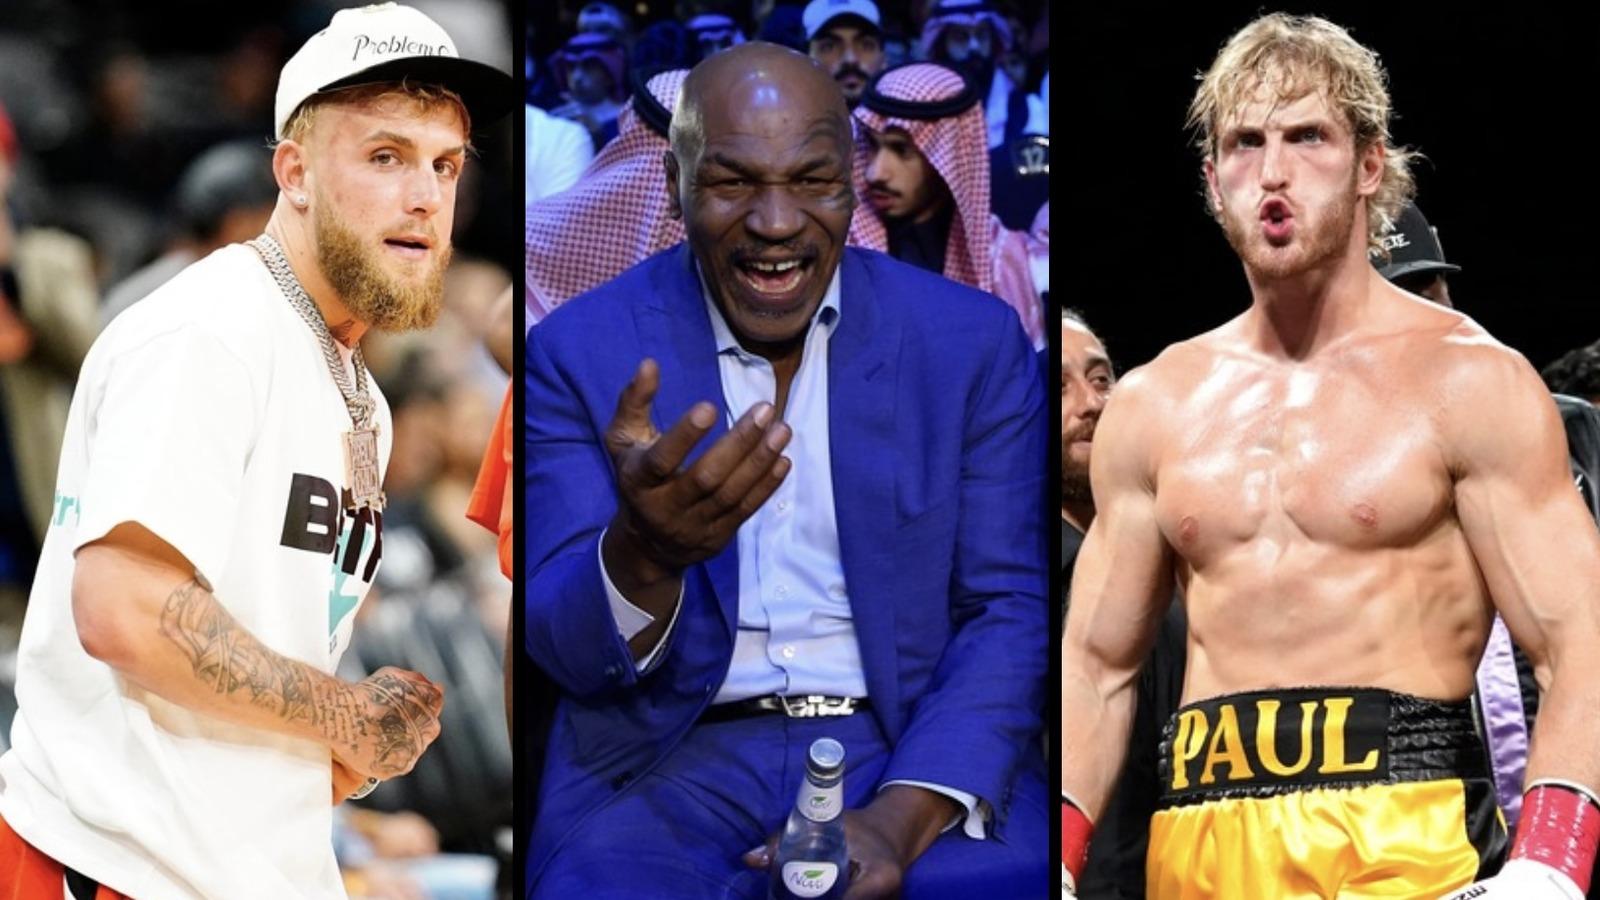 Jake Paul will square off with Mike Tyson later this summer, but his brother, Logan, is already hyping up the possibility of victory.